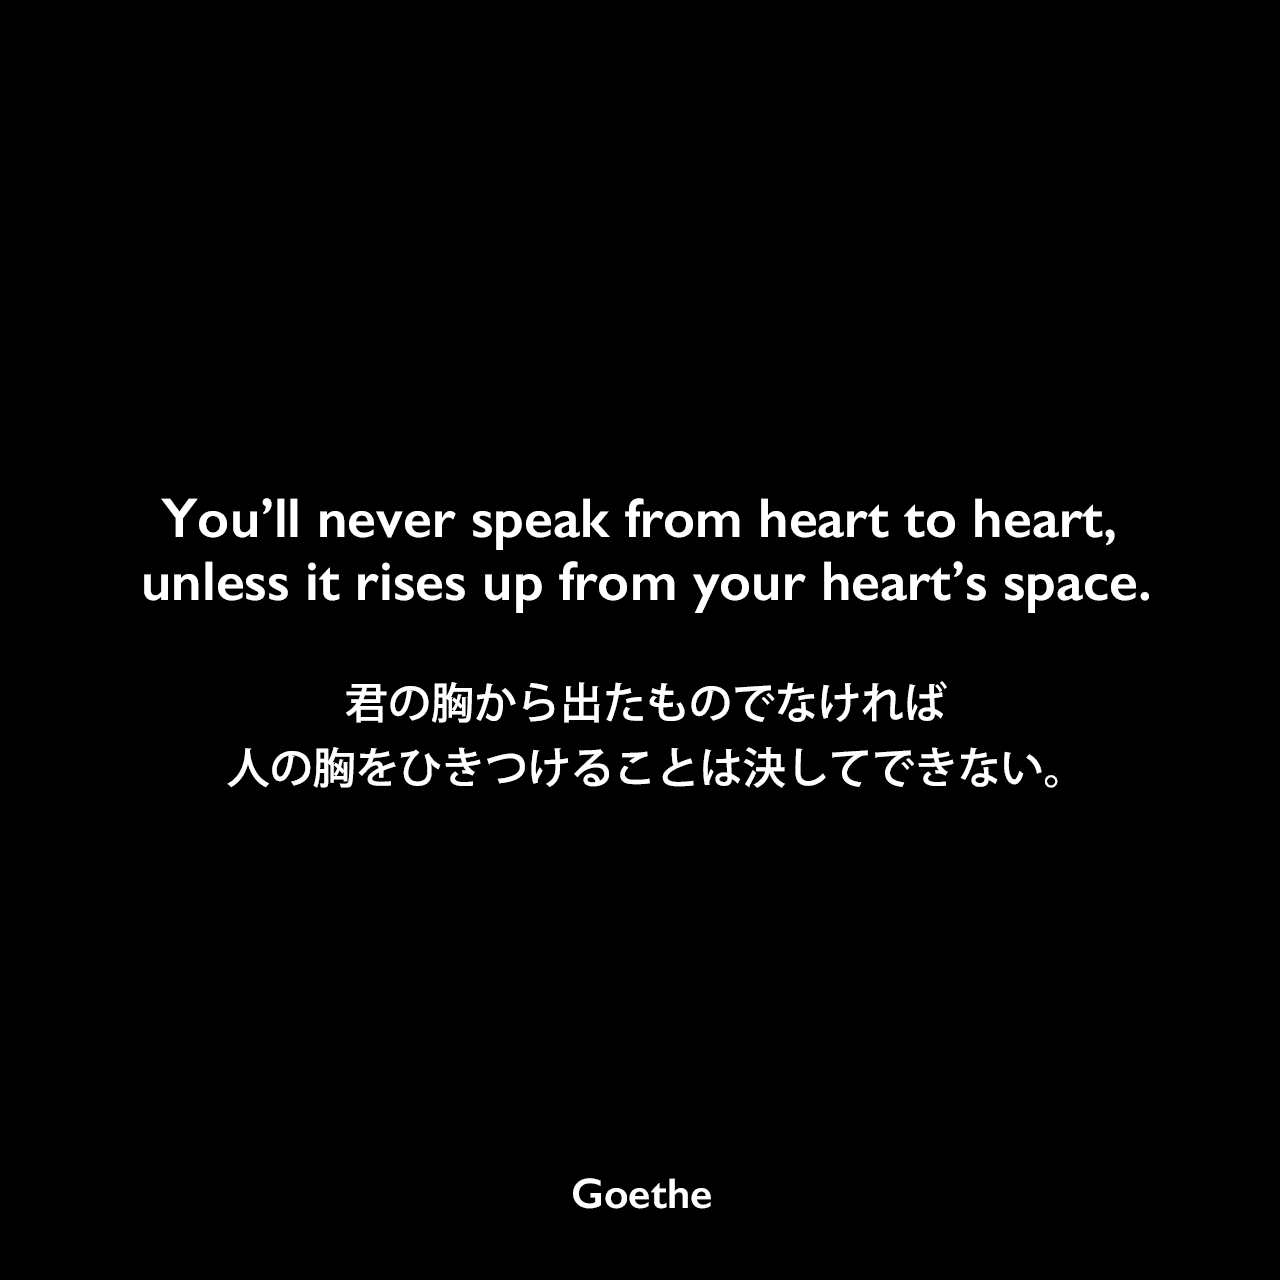 You’ll never speak from heart to heart, unless it rises up from your heart’s space.君の胸から出たものでなければ、人の胸をひきつけることは決してできない。Johann Wolfgang von Goethe